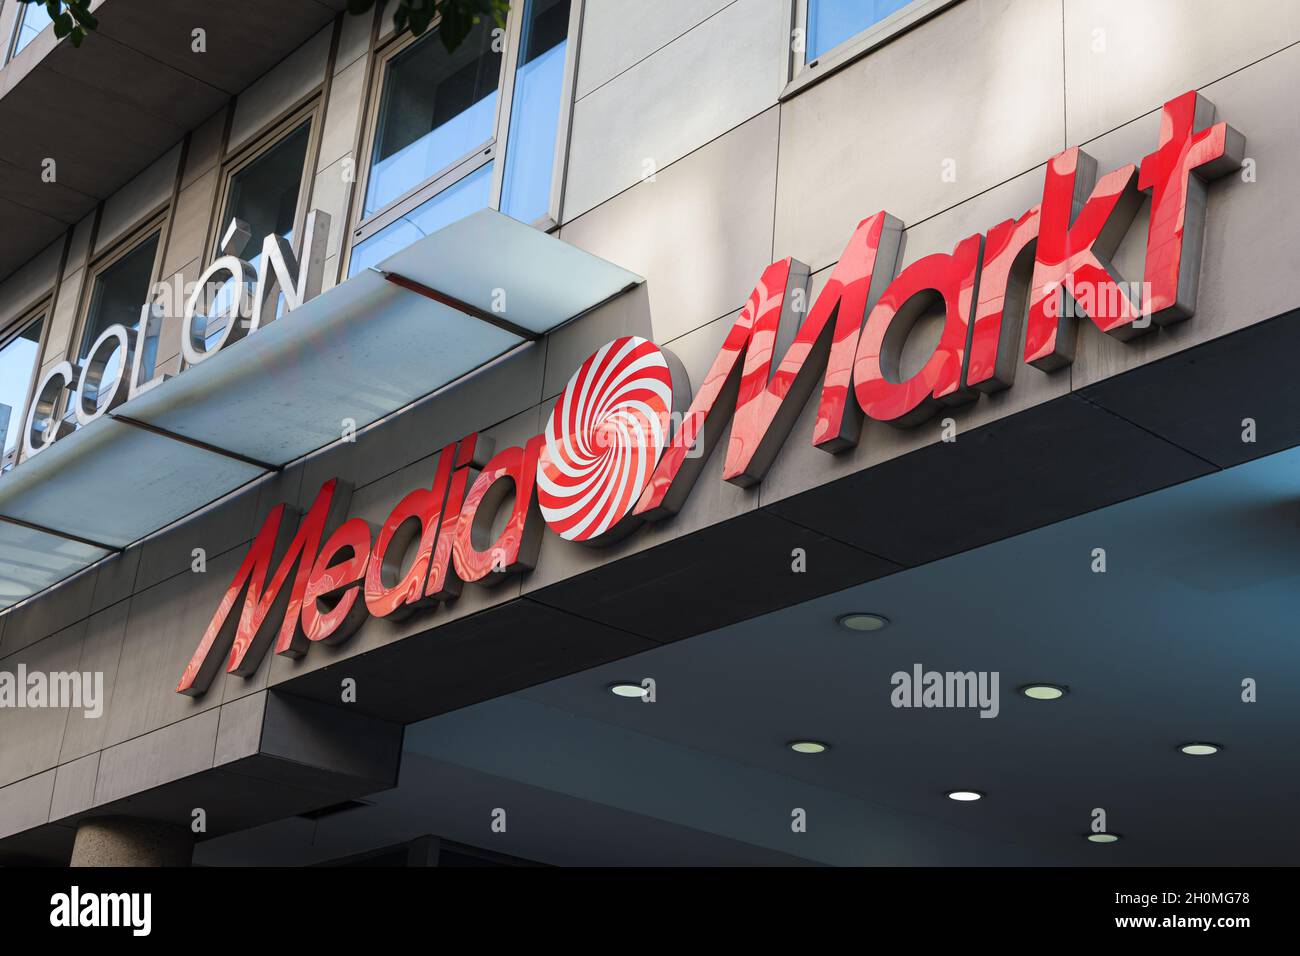 Mediamarkt store hi-res stock photography and images - Alamy